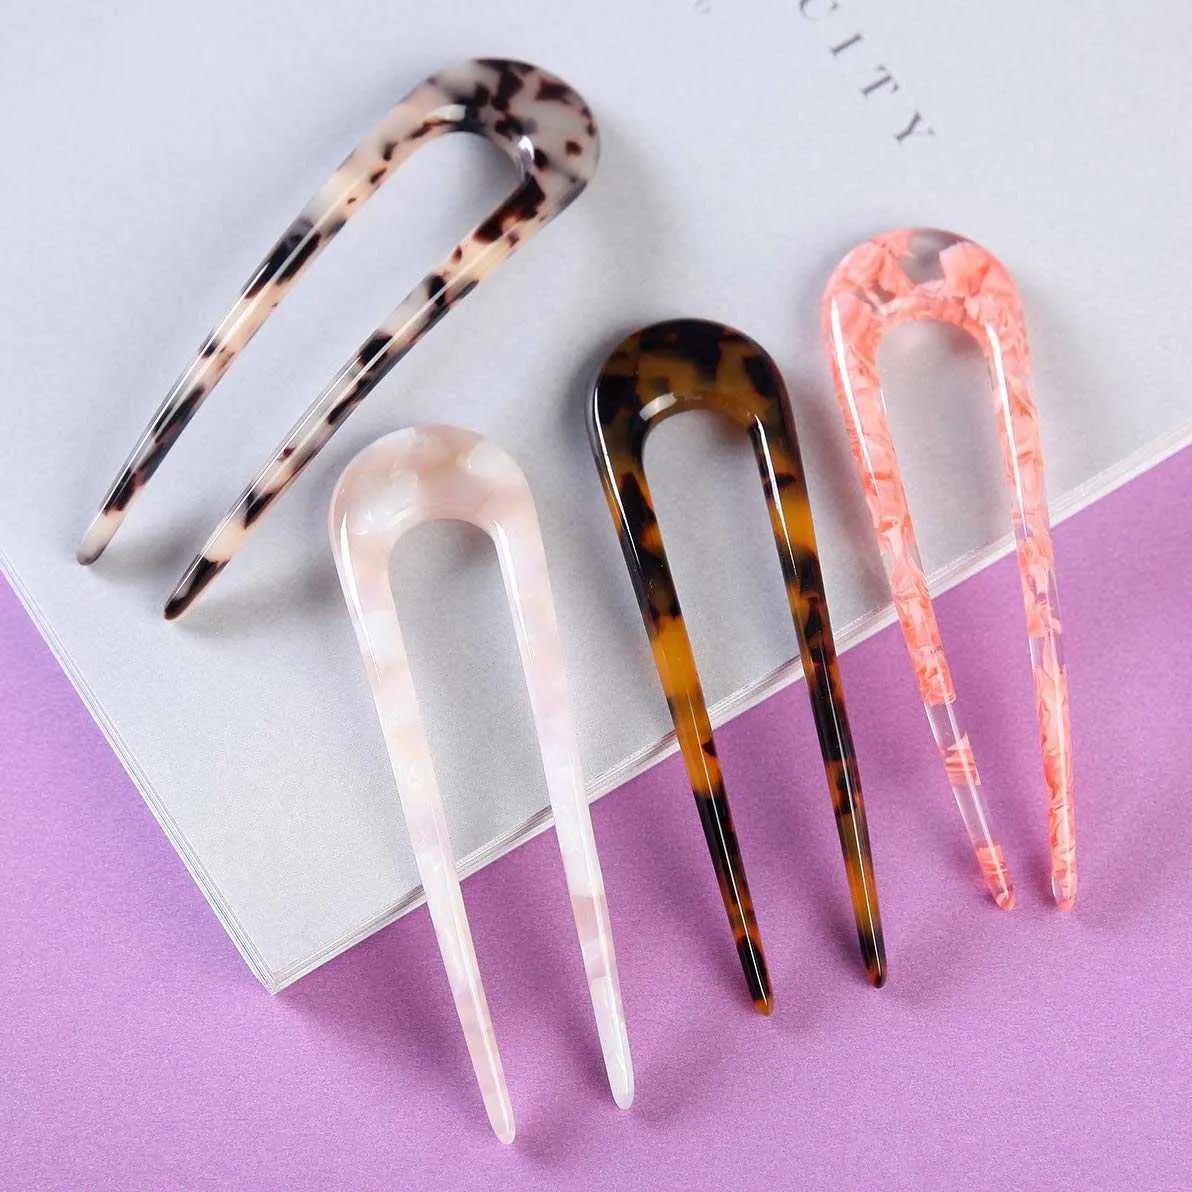 U Shaped Hair Pin Stick French Style U Shape Hair Clips Tortoise Shell U Sticks Pins For Women Girls Hairstyle Accessories Y0723